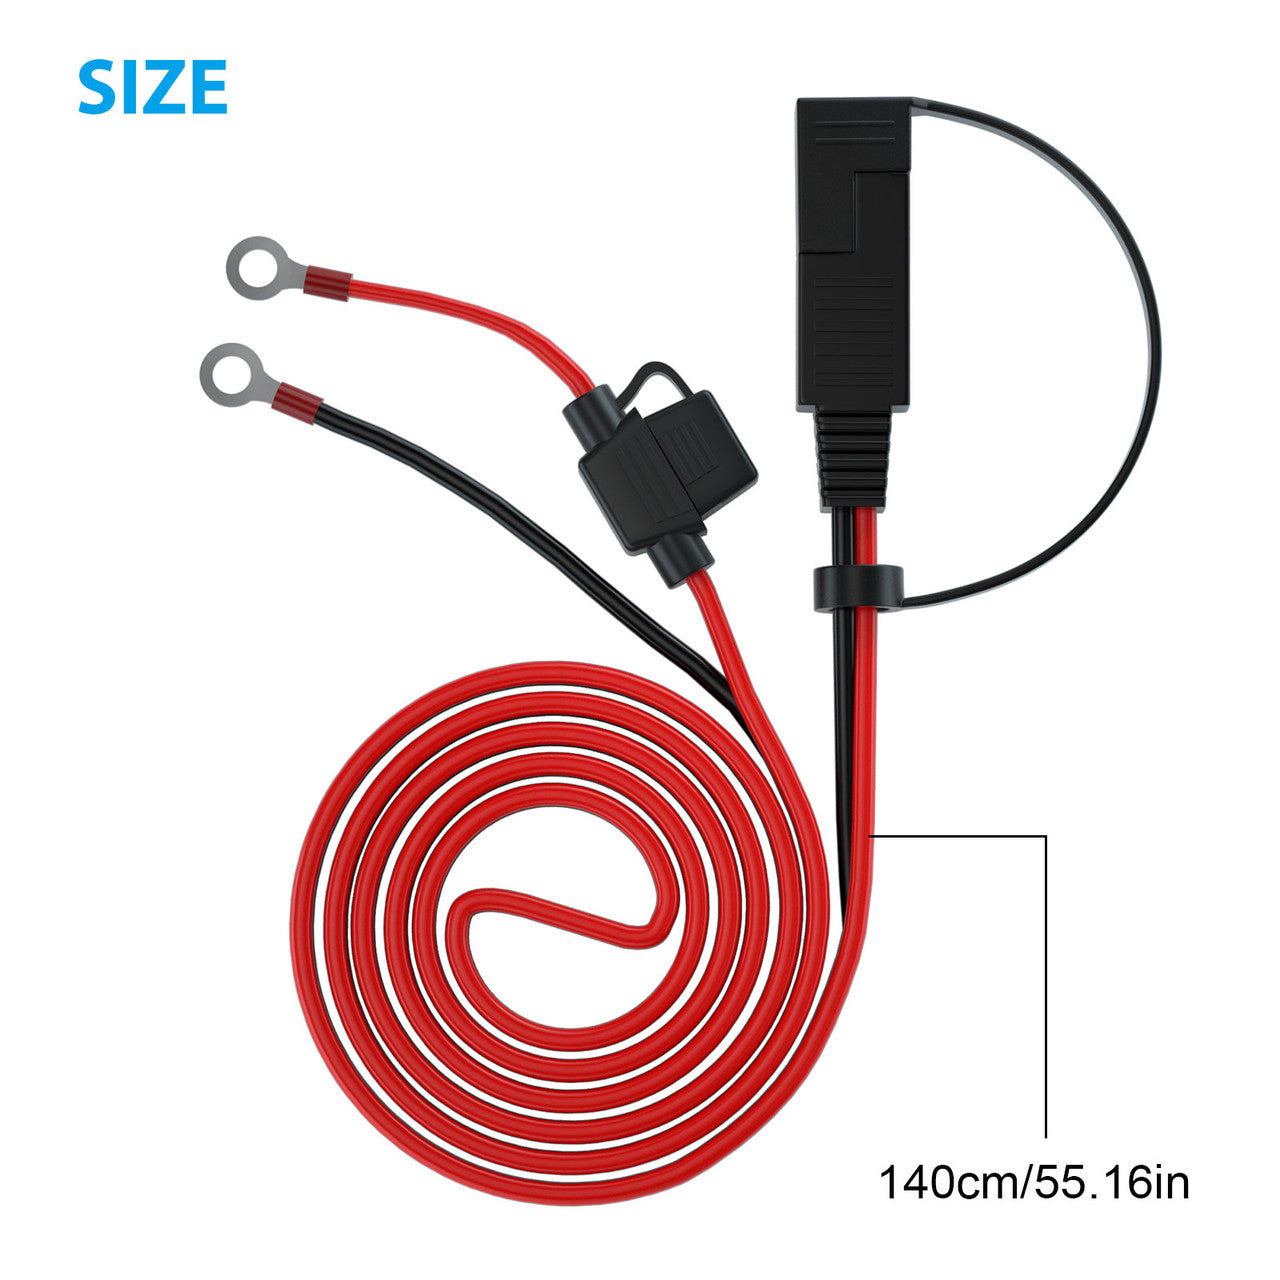 1.4m SAE Battery Cable Extension Wire for Automotive Vehicles, 2Pc